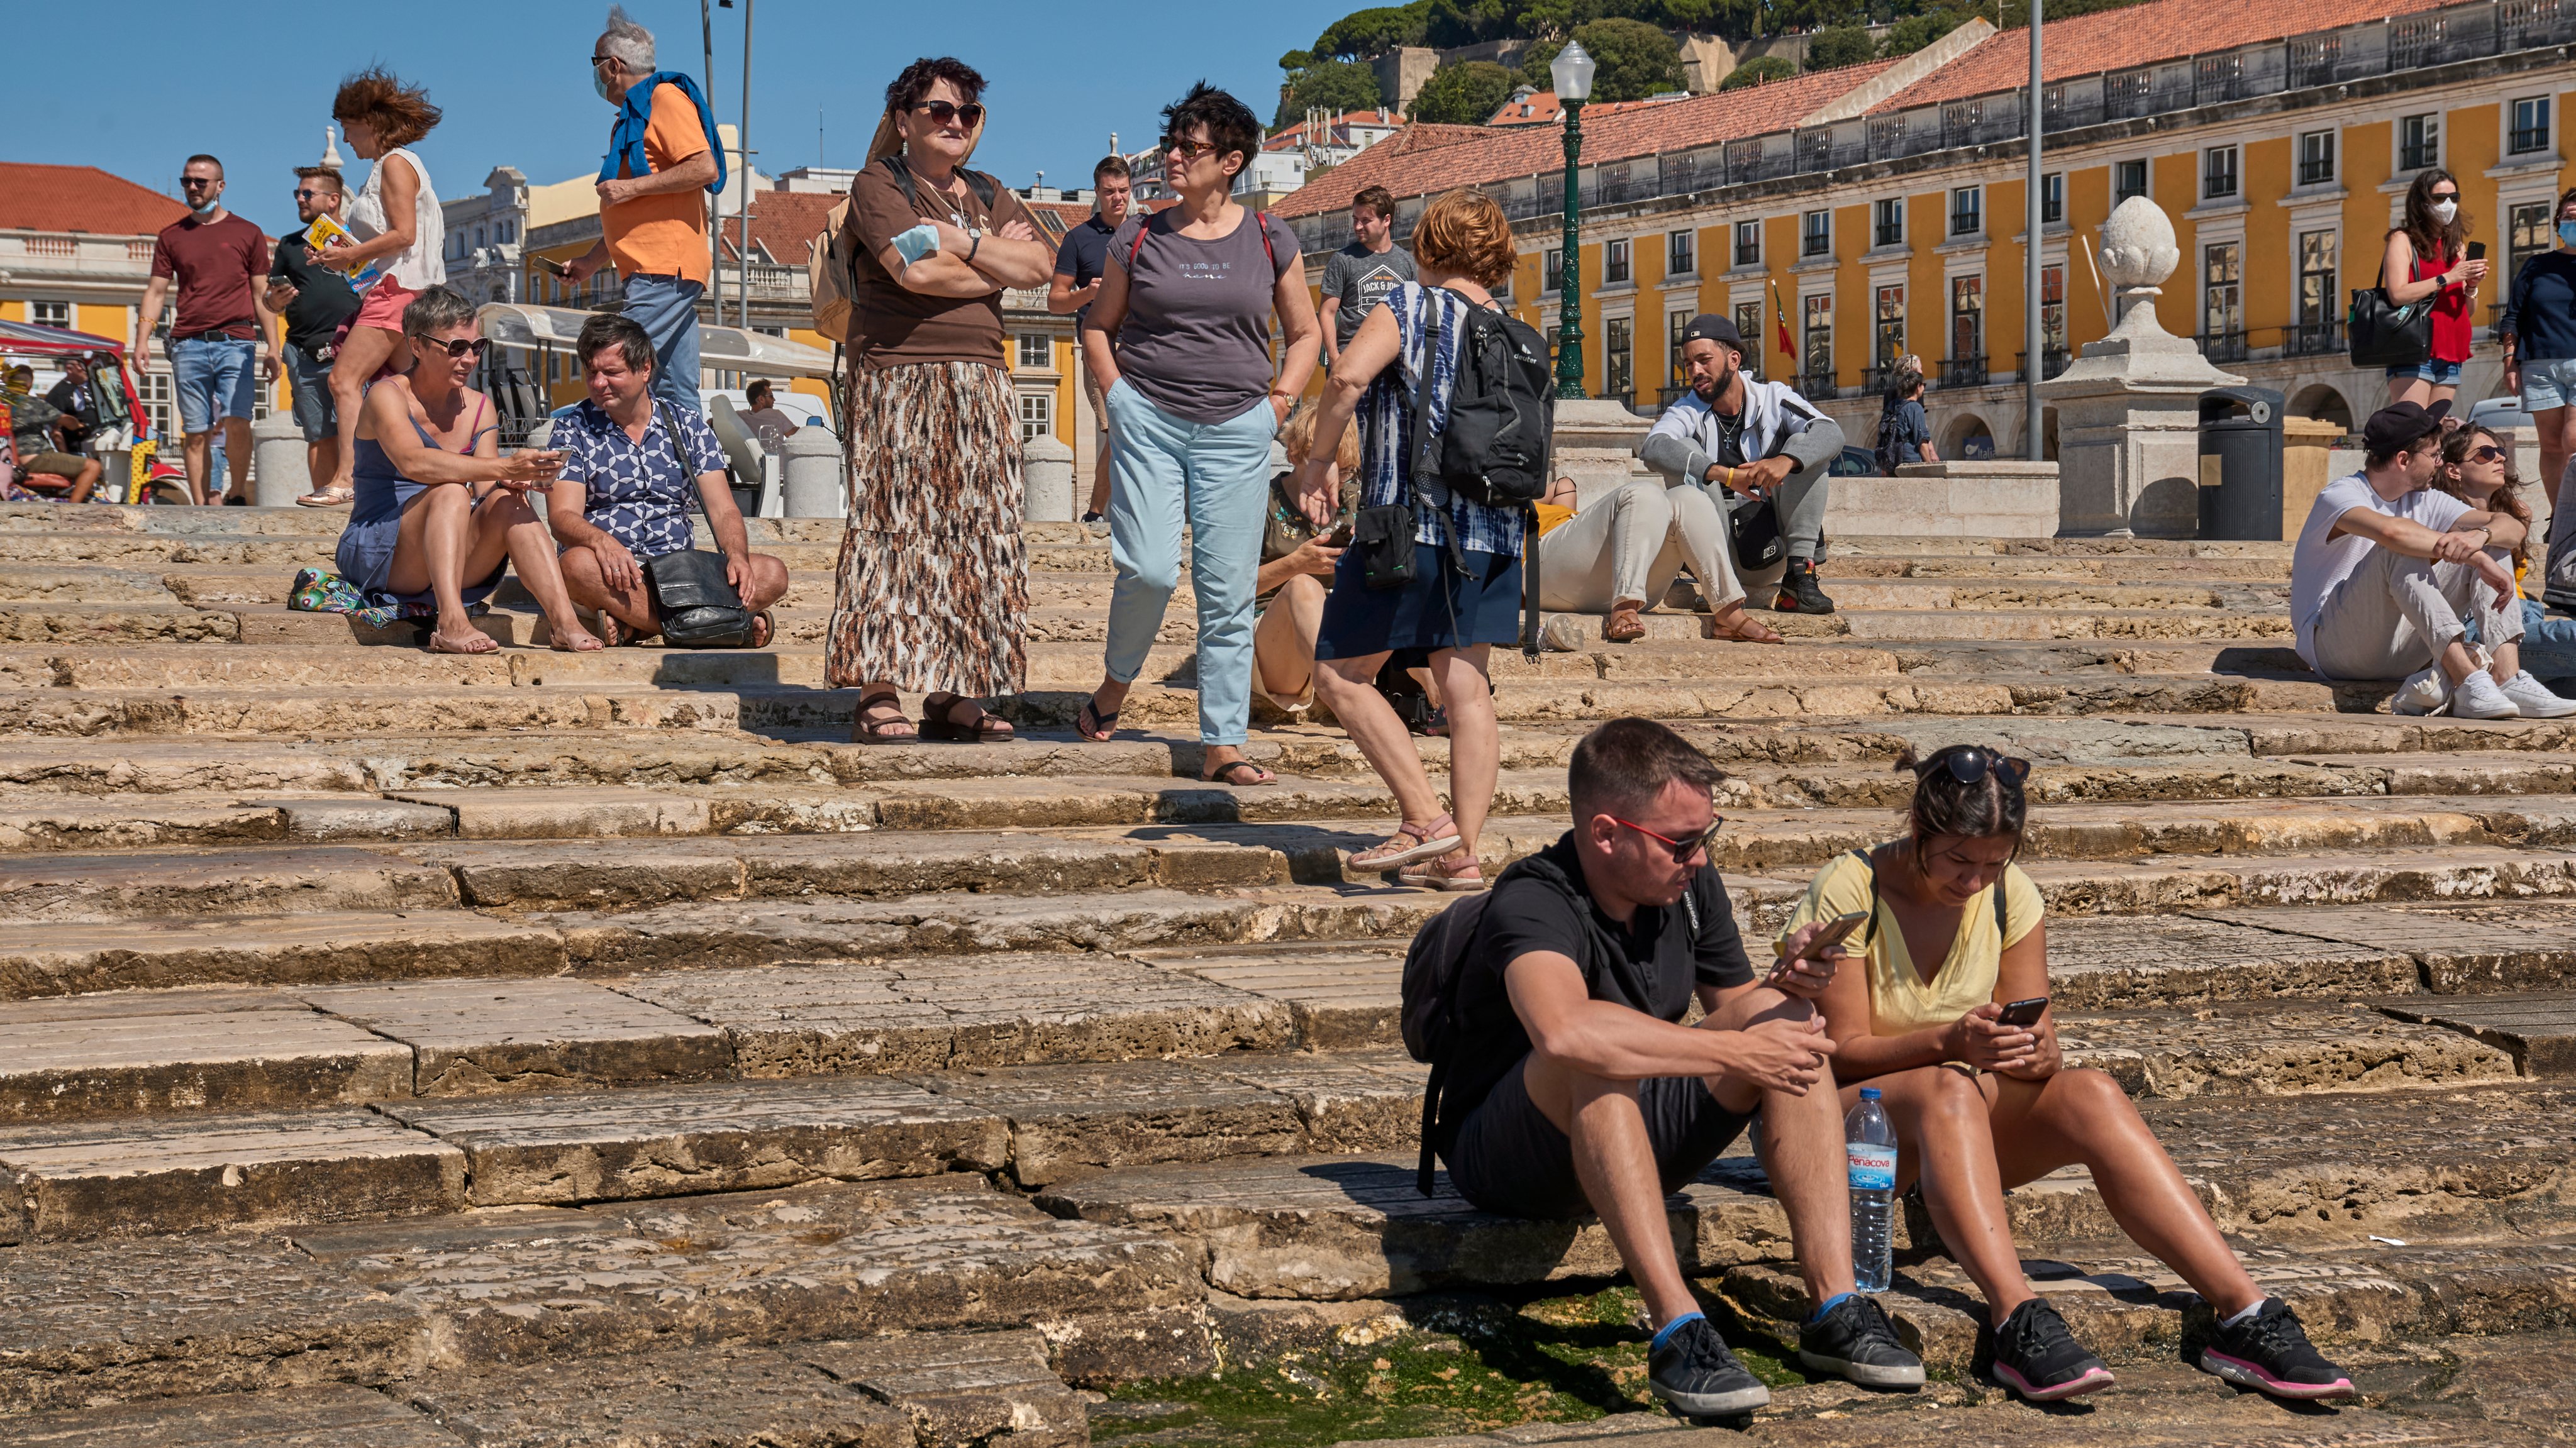 Tourism Is Slowly Picking Up As COVID-19 Pandemic Situation Seems To Be Better In Portugal